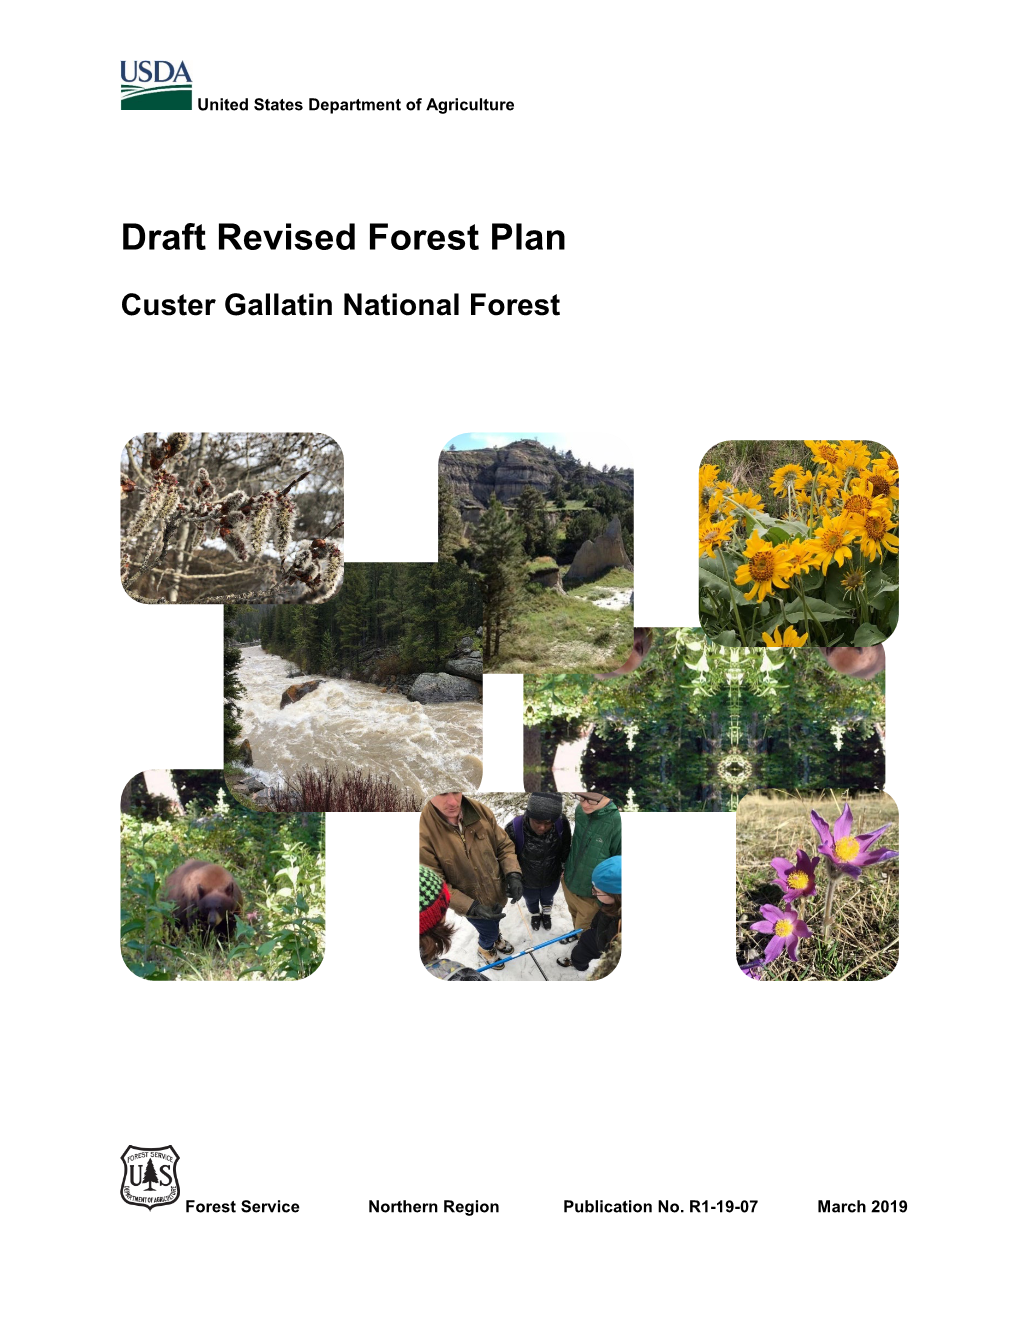 Draft Revised Forest Plan for the Custer Gallatin National Forest